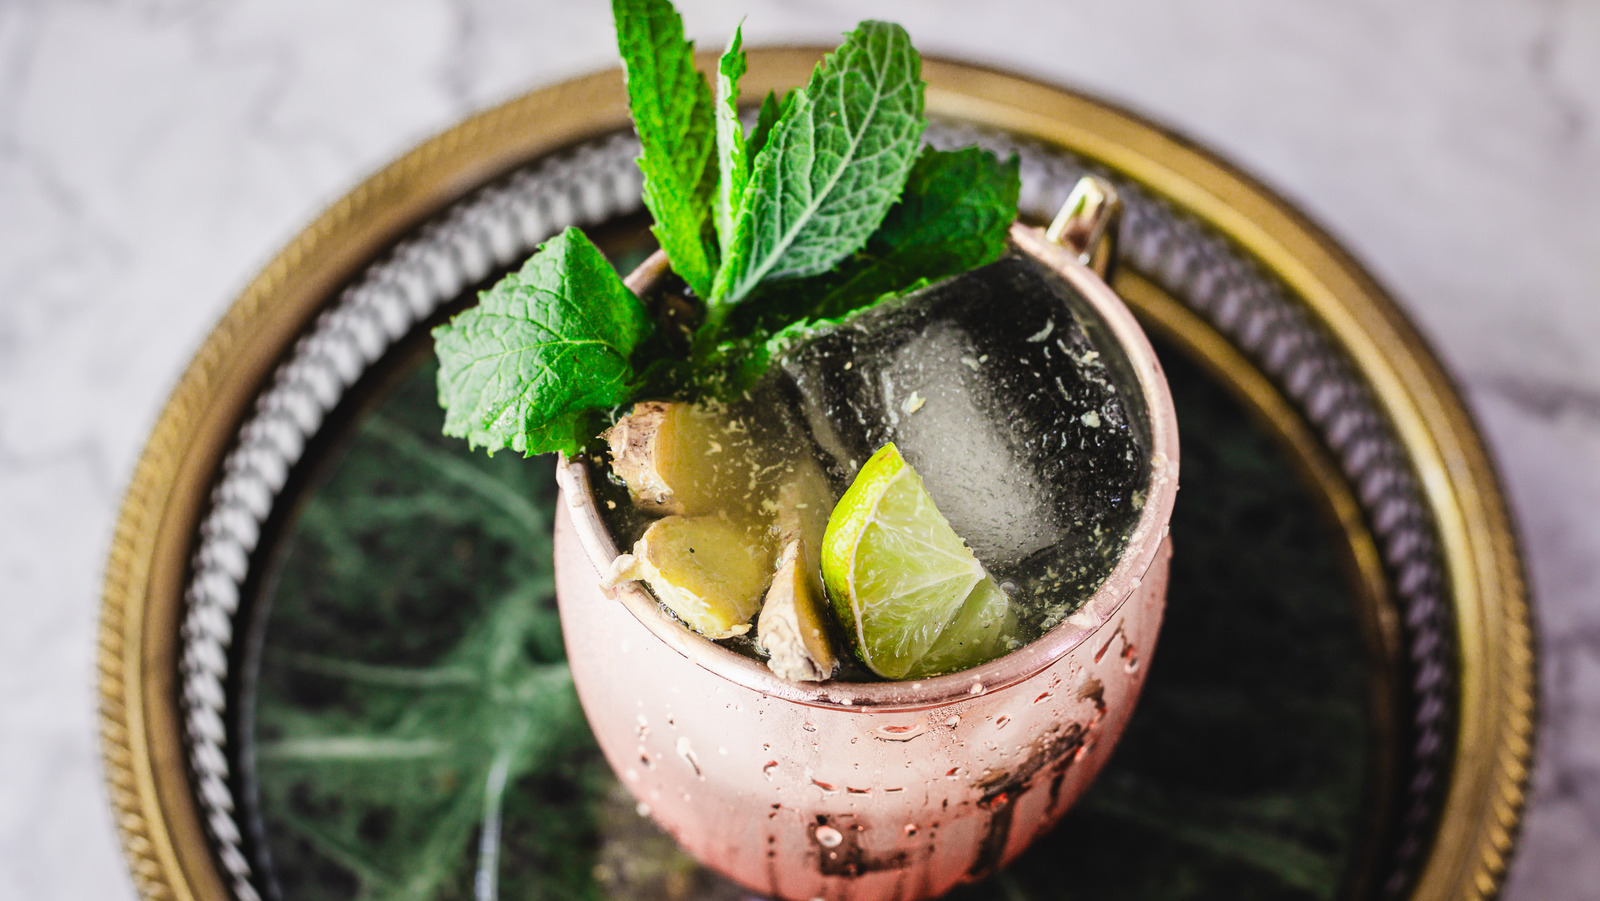 Classic Moscow Mule - Recipes